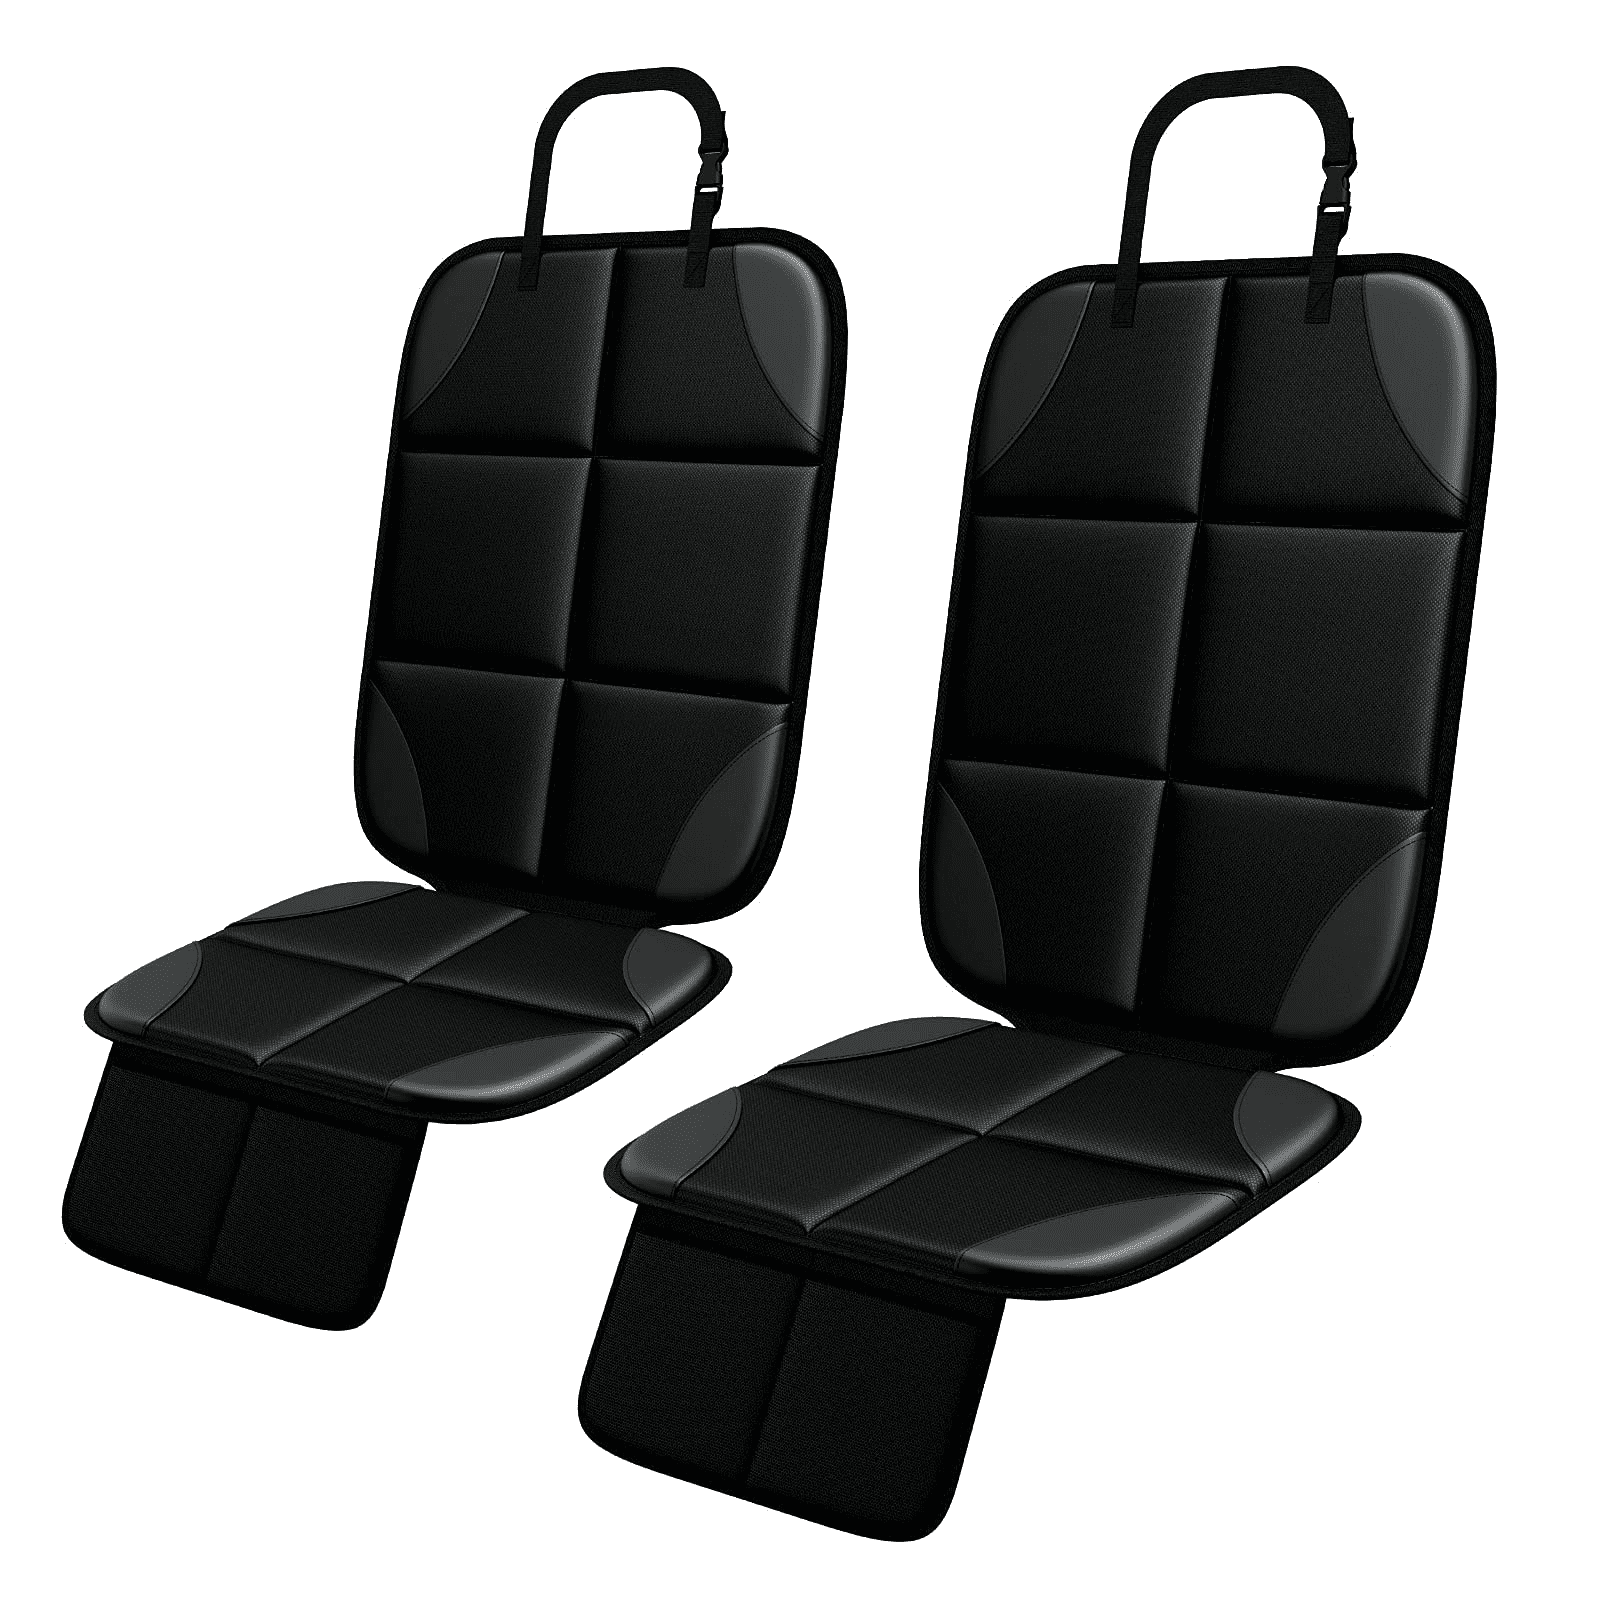 2 X Car Auto Care Seat Back Protector Cover For Children Kick Mat Mud Clean UK 